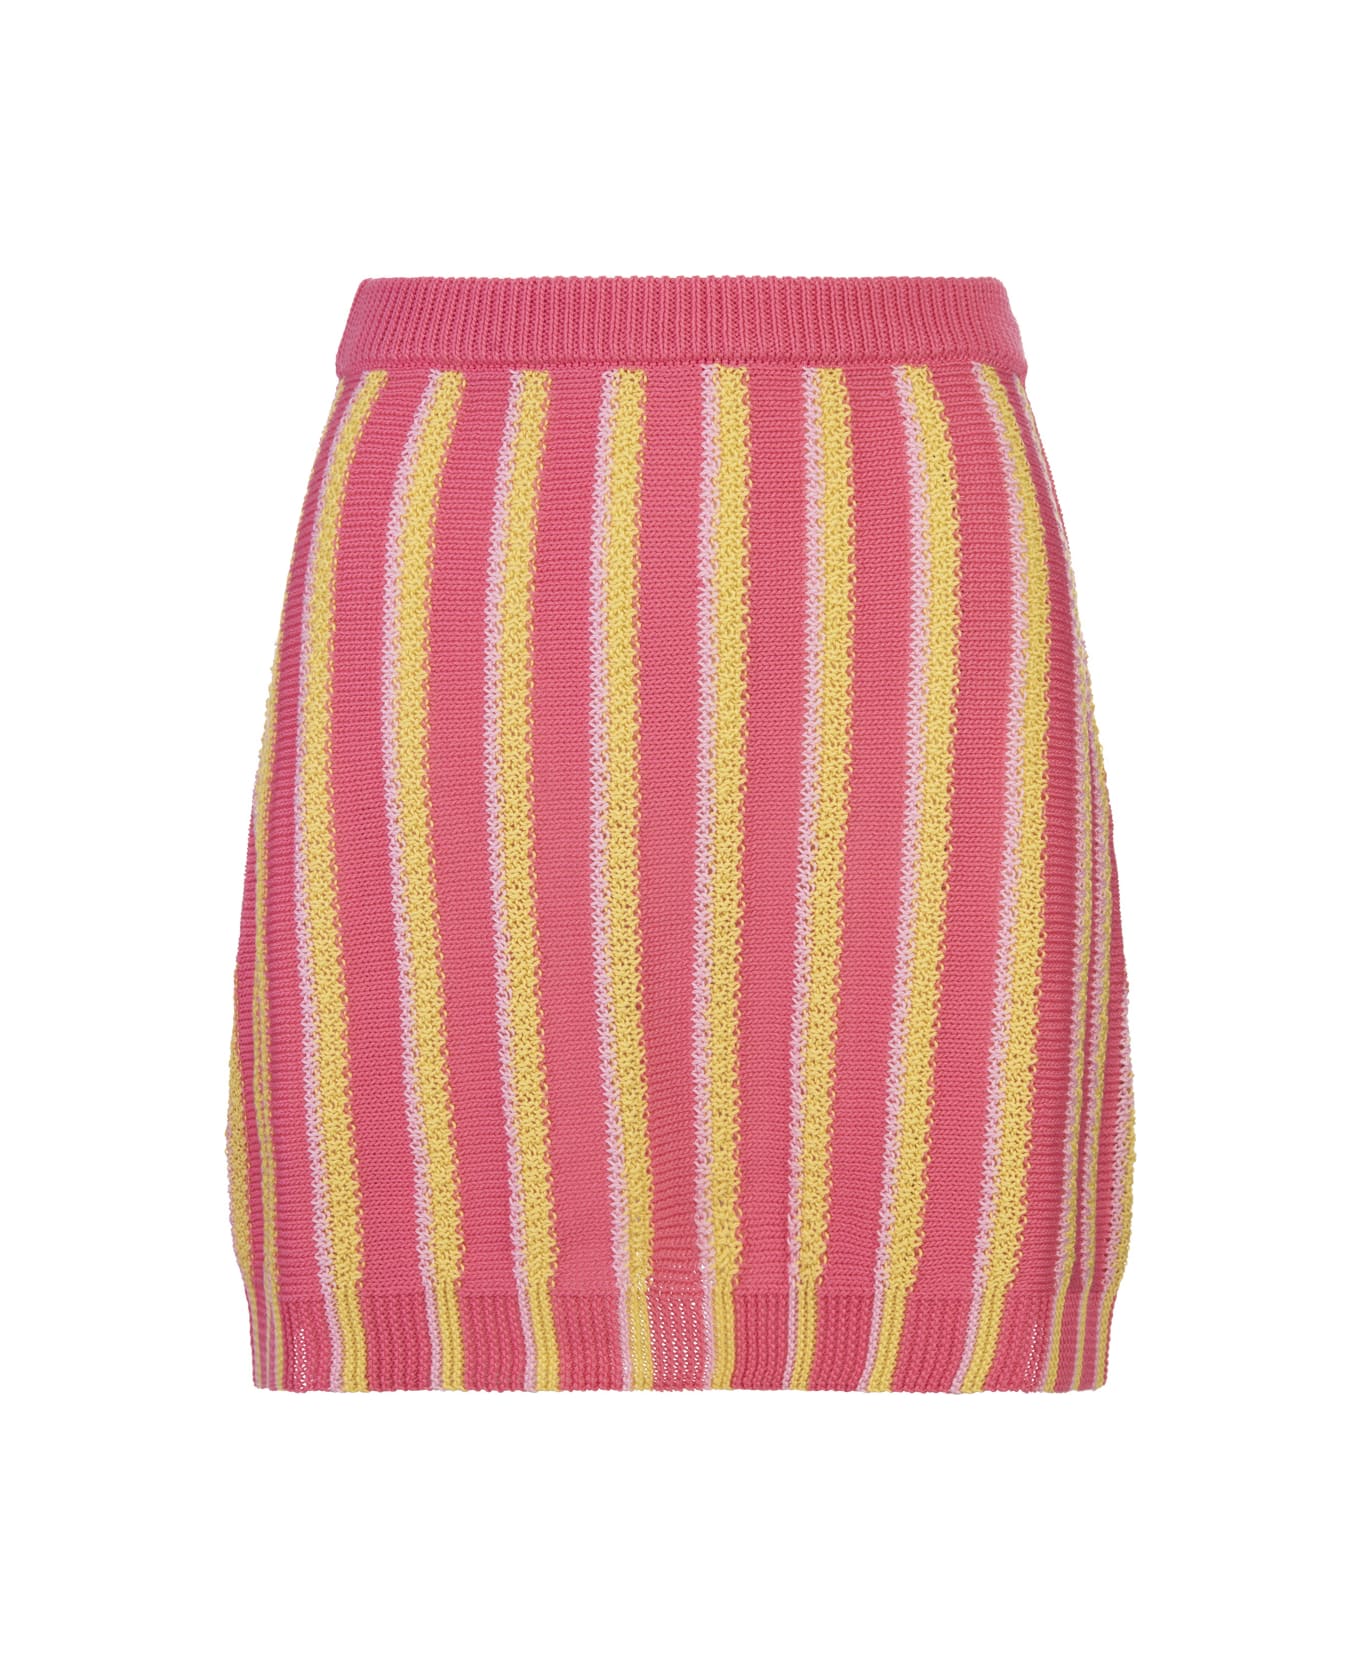 Marni Pink, Yellow And White Striped Knitted Mini Skirt - Pink